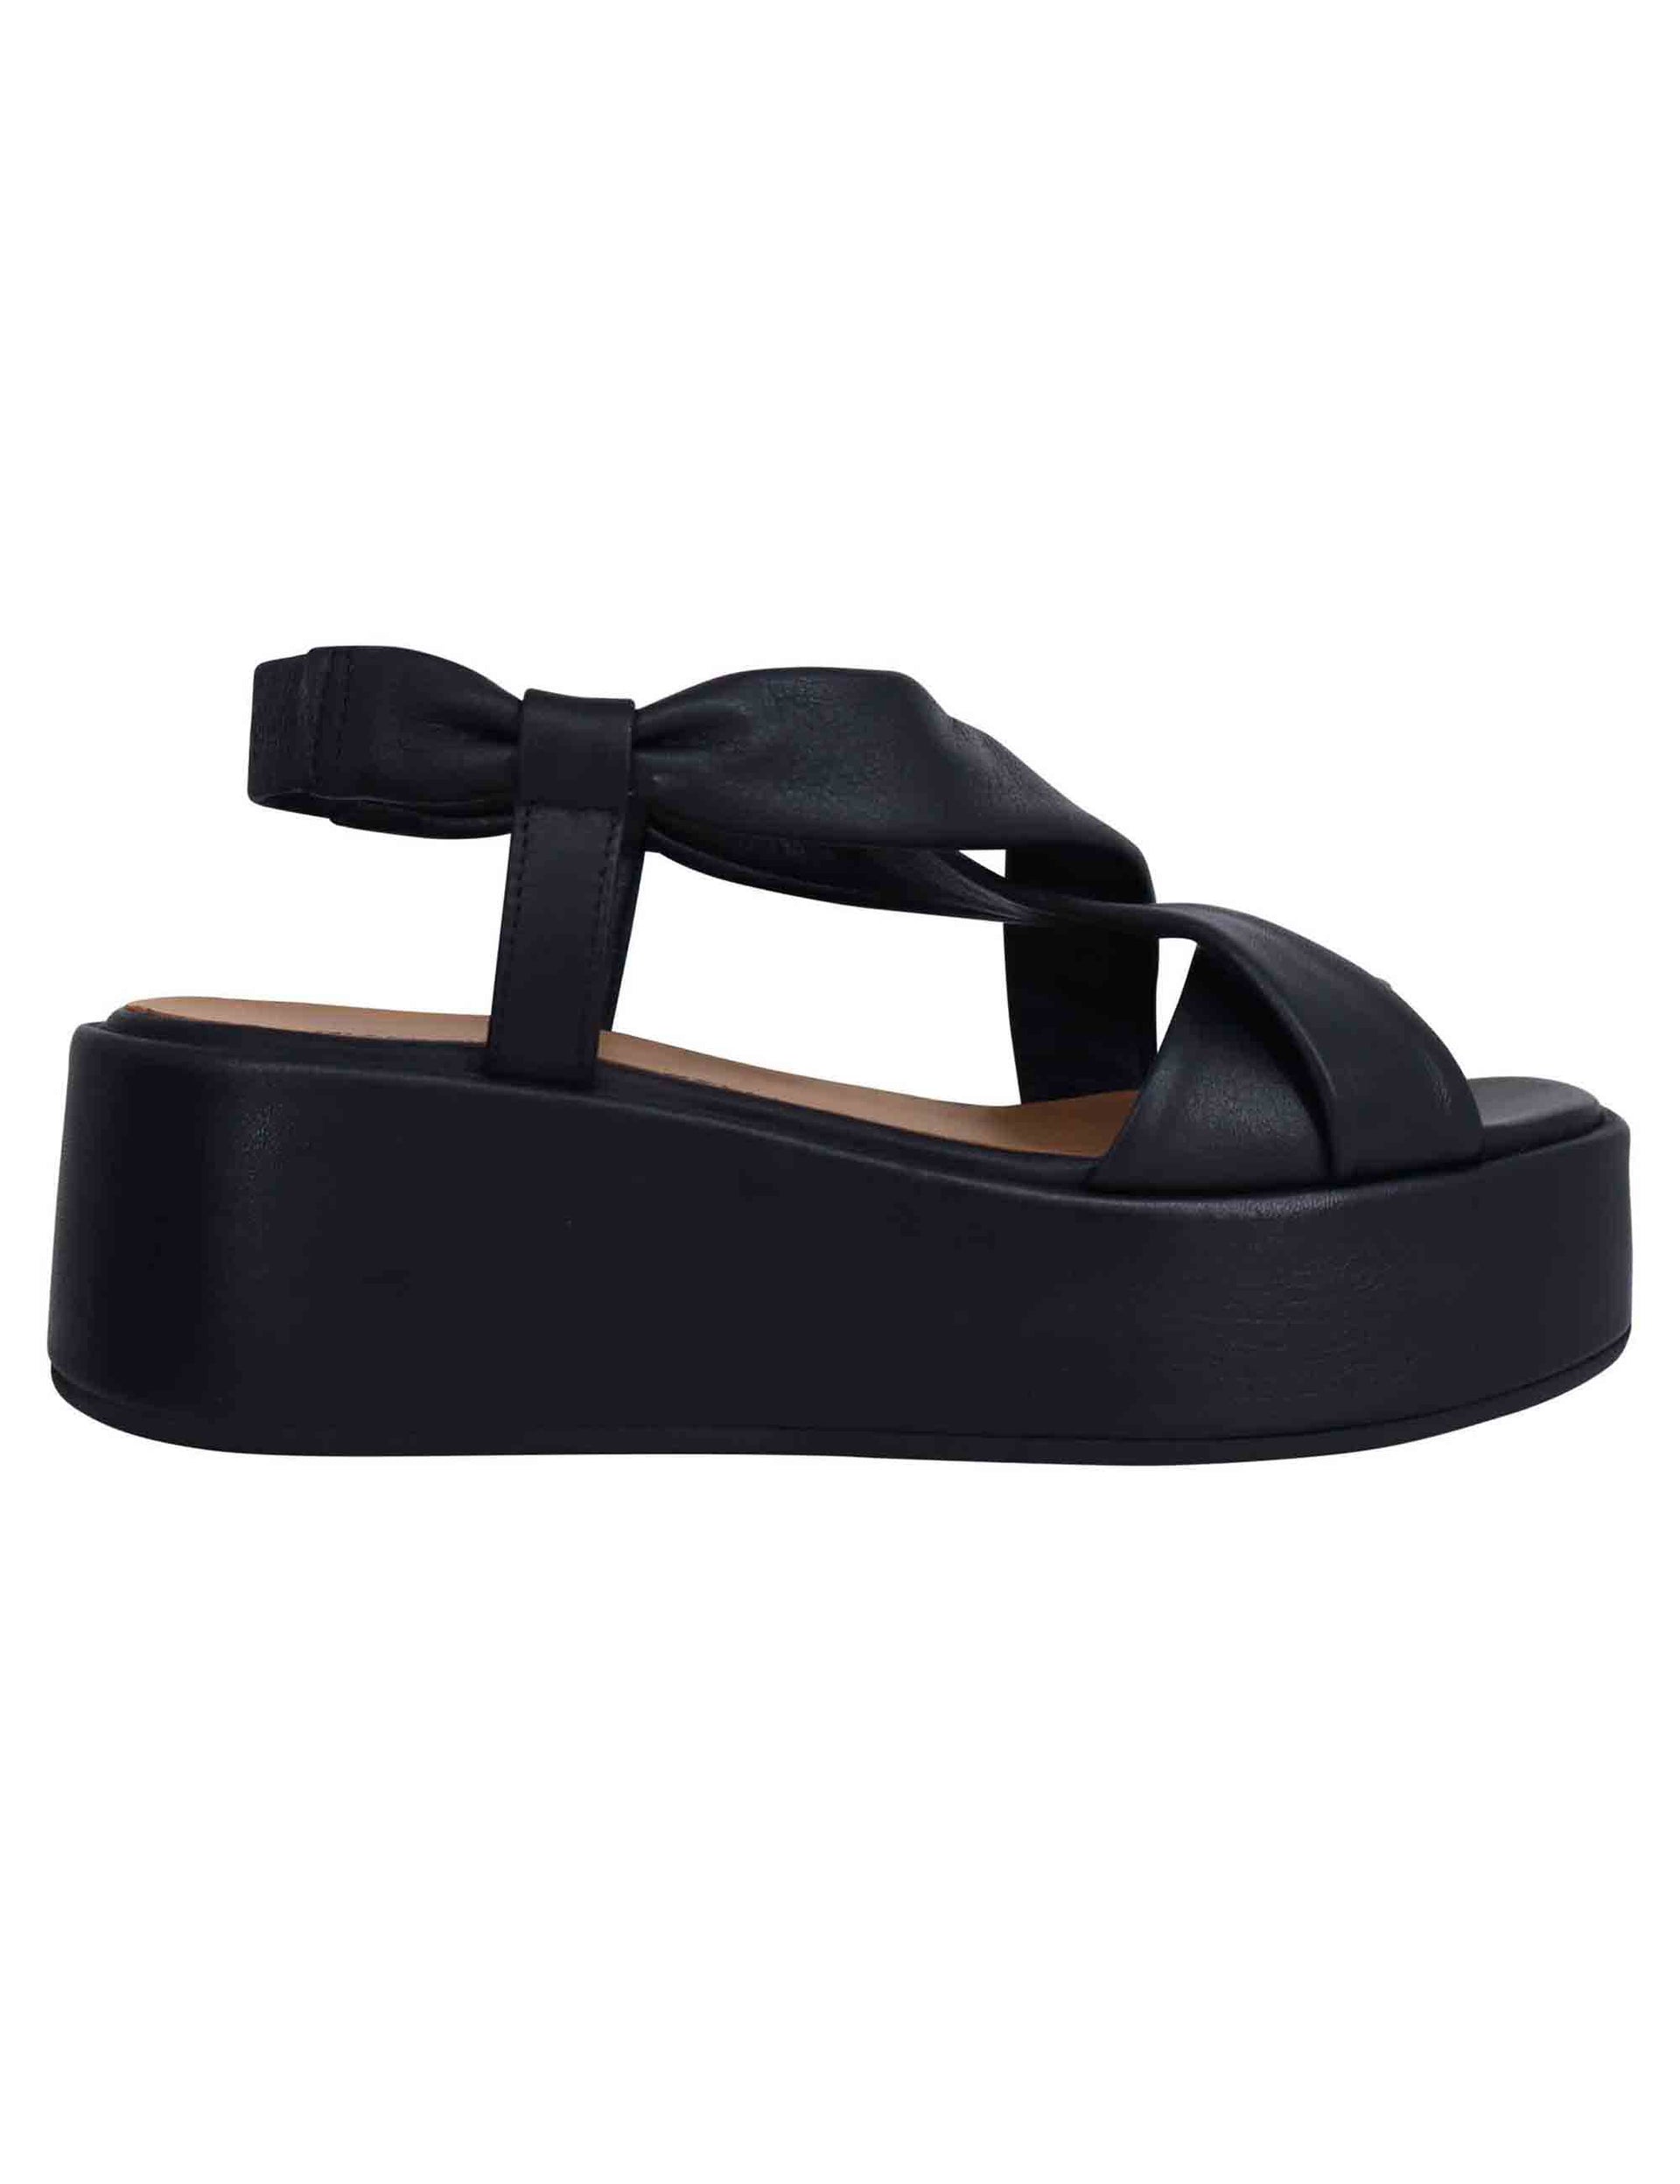 Women's black leather sandals with matching banded wedge